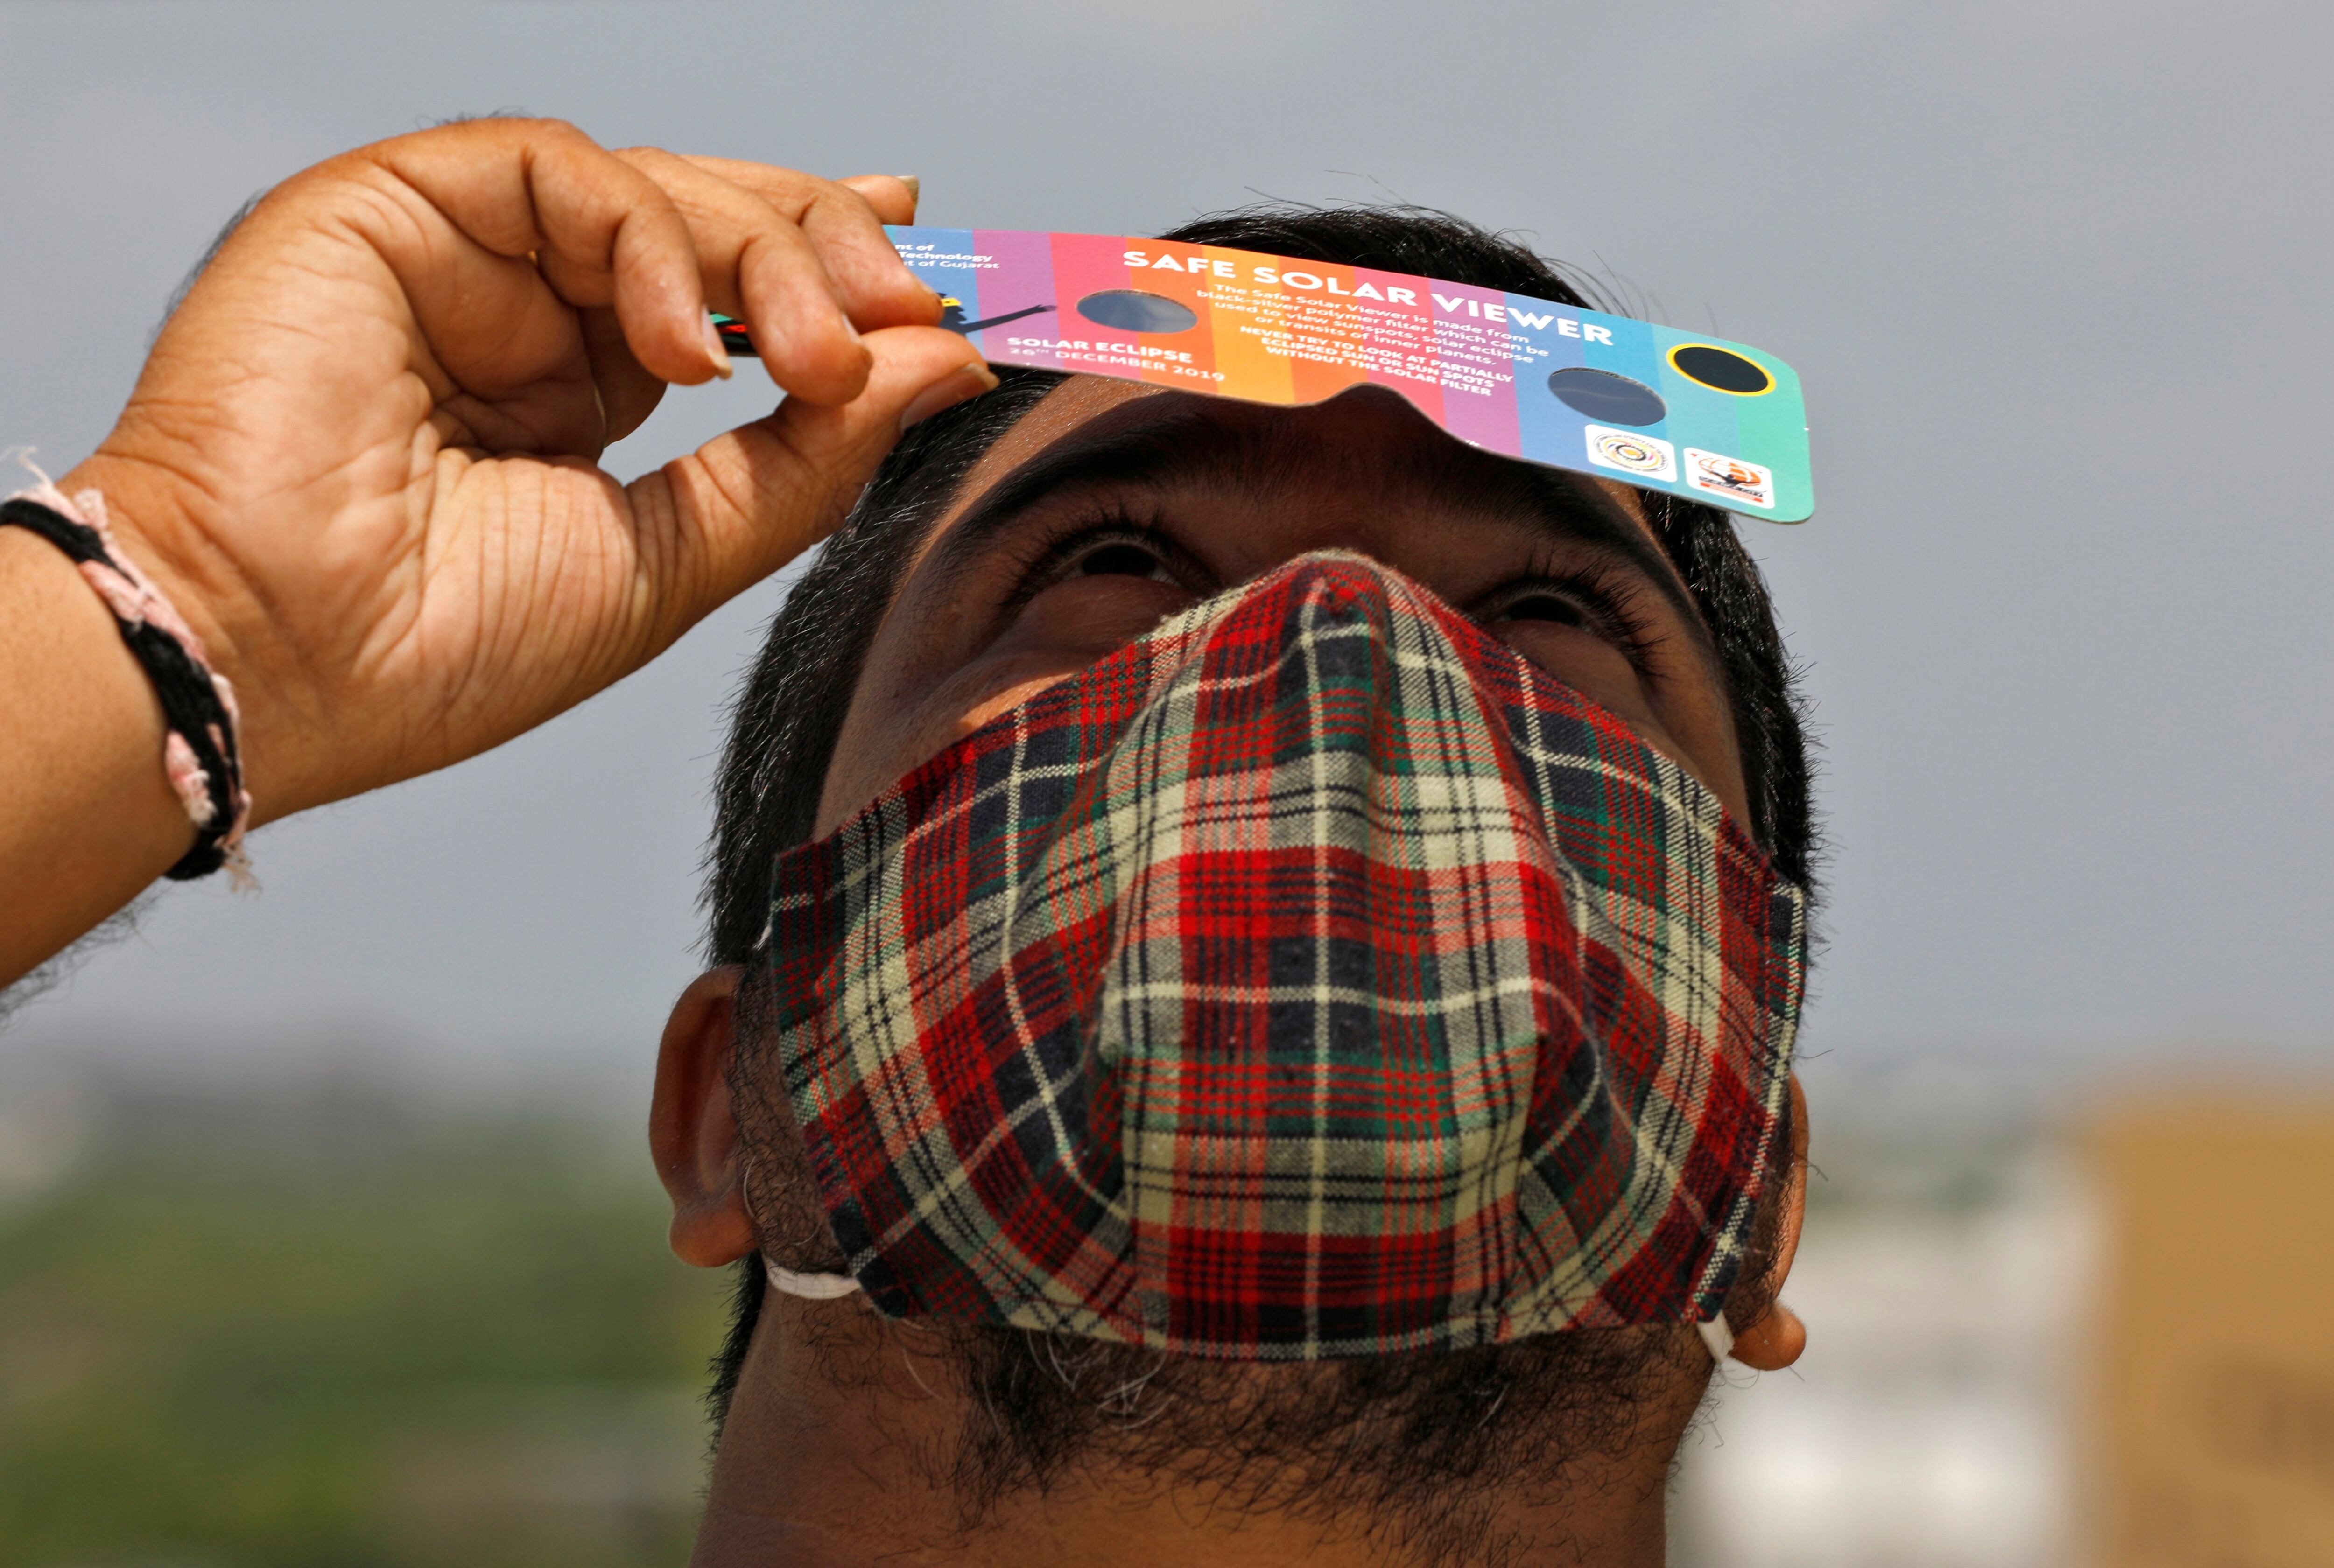 A man, wearing a protective face mask against the coronavirus disease (COVID-19), uses solar viewers to watch a partial solar eclipse at Gandhinagar, India, June 21, 2020. REUTERS/Amit Dave